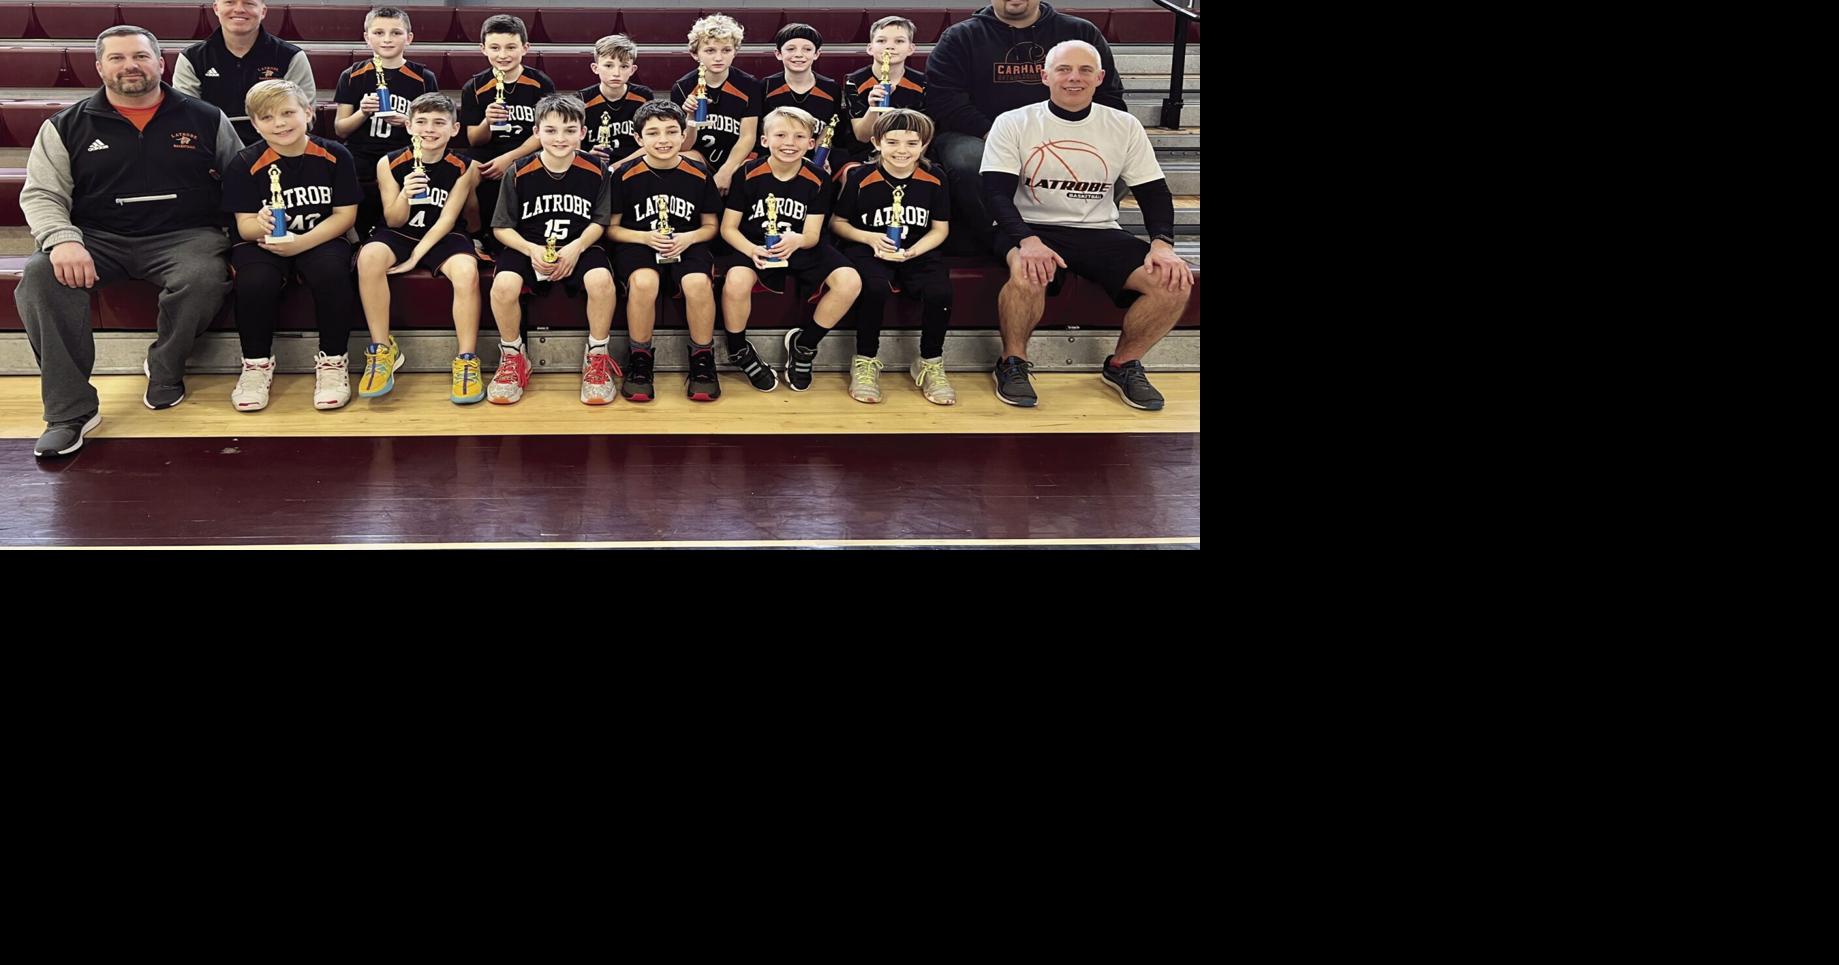 The Latrobe fourthgrade basketball team came in second in tourney